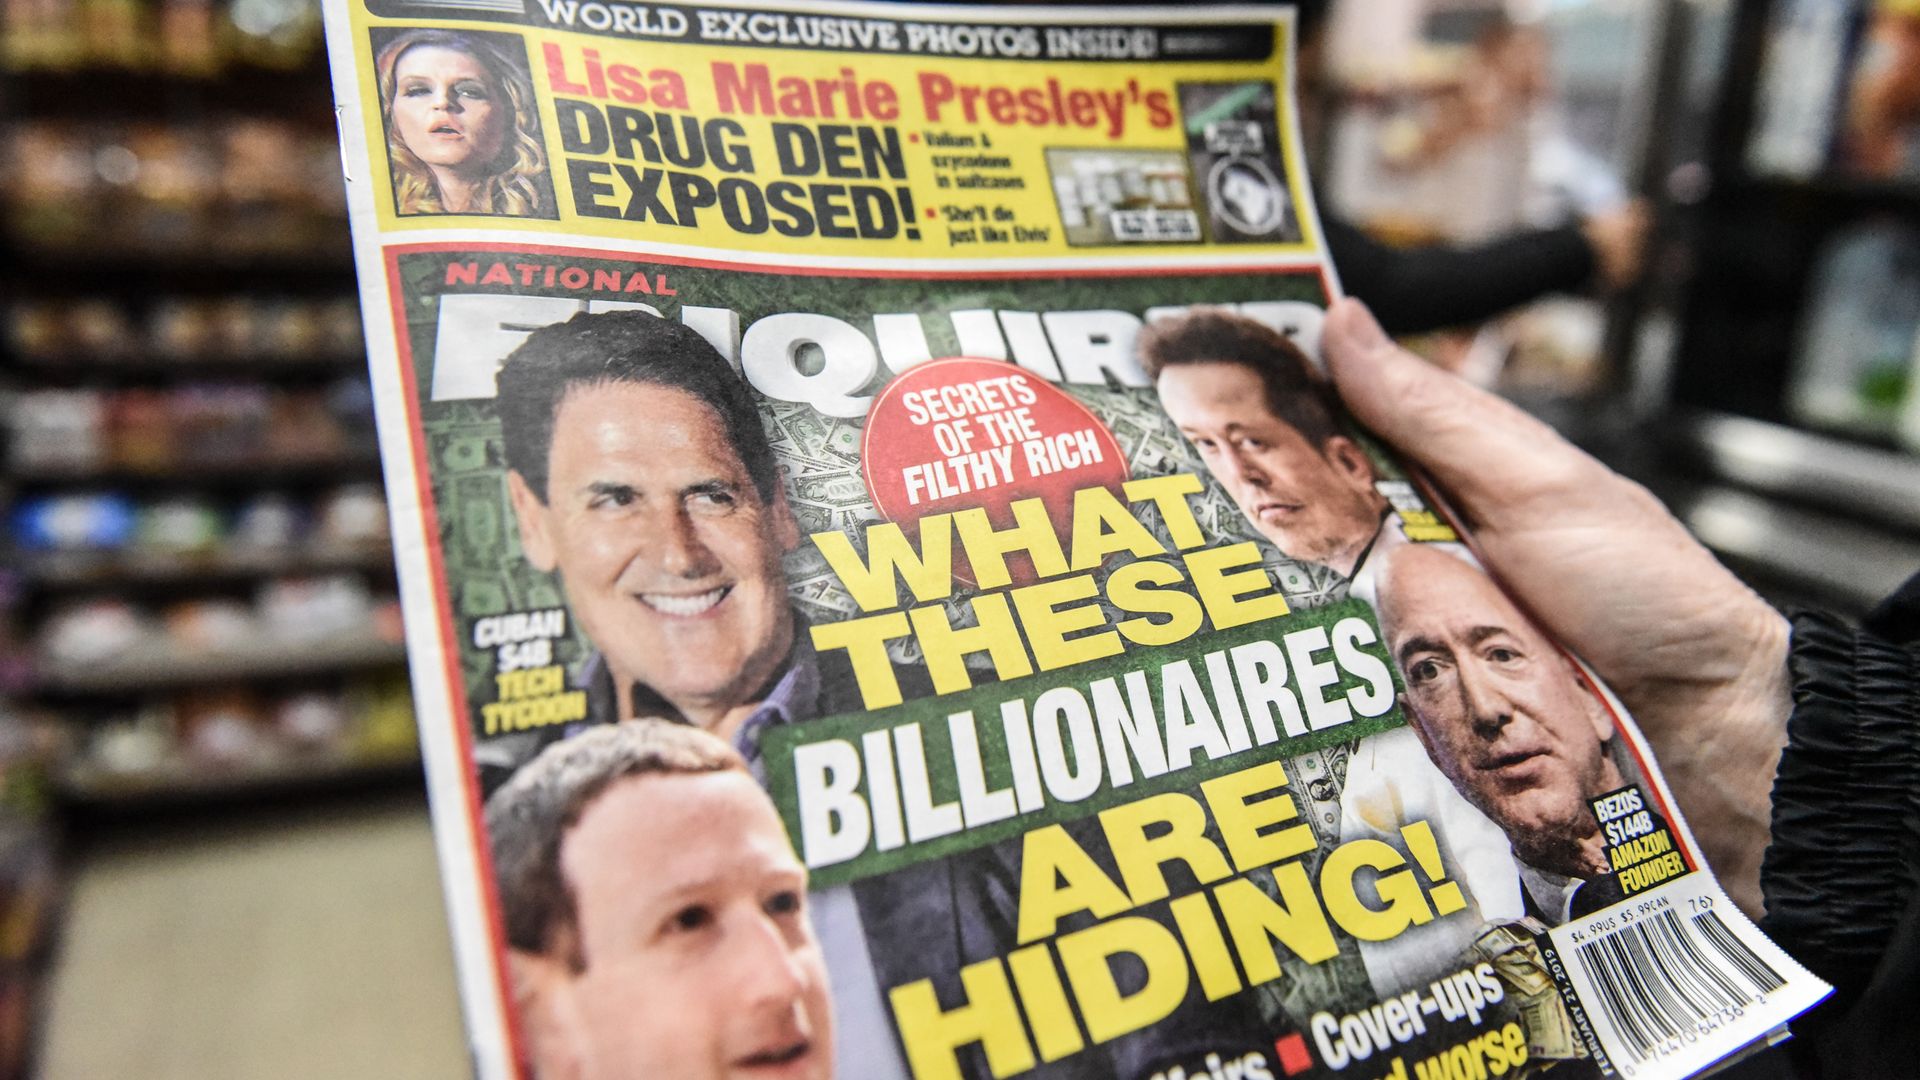 In this image, a copy of the National Enquirer is held up close to the camera by an unseen person. 